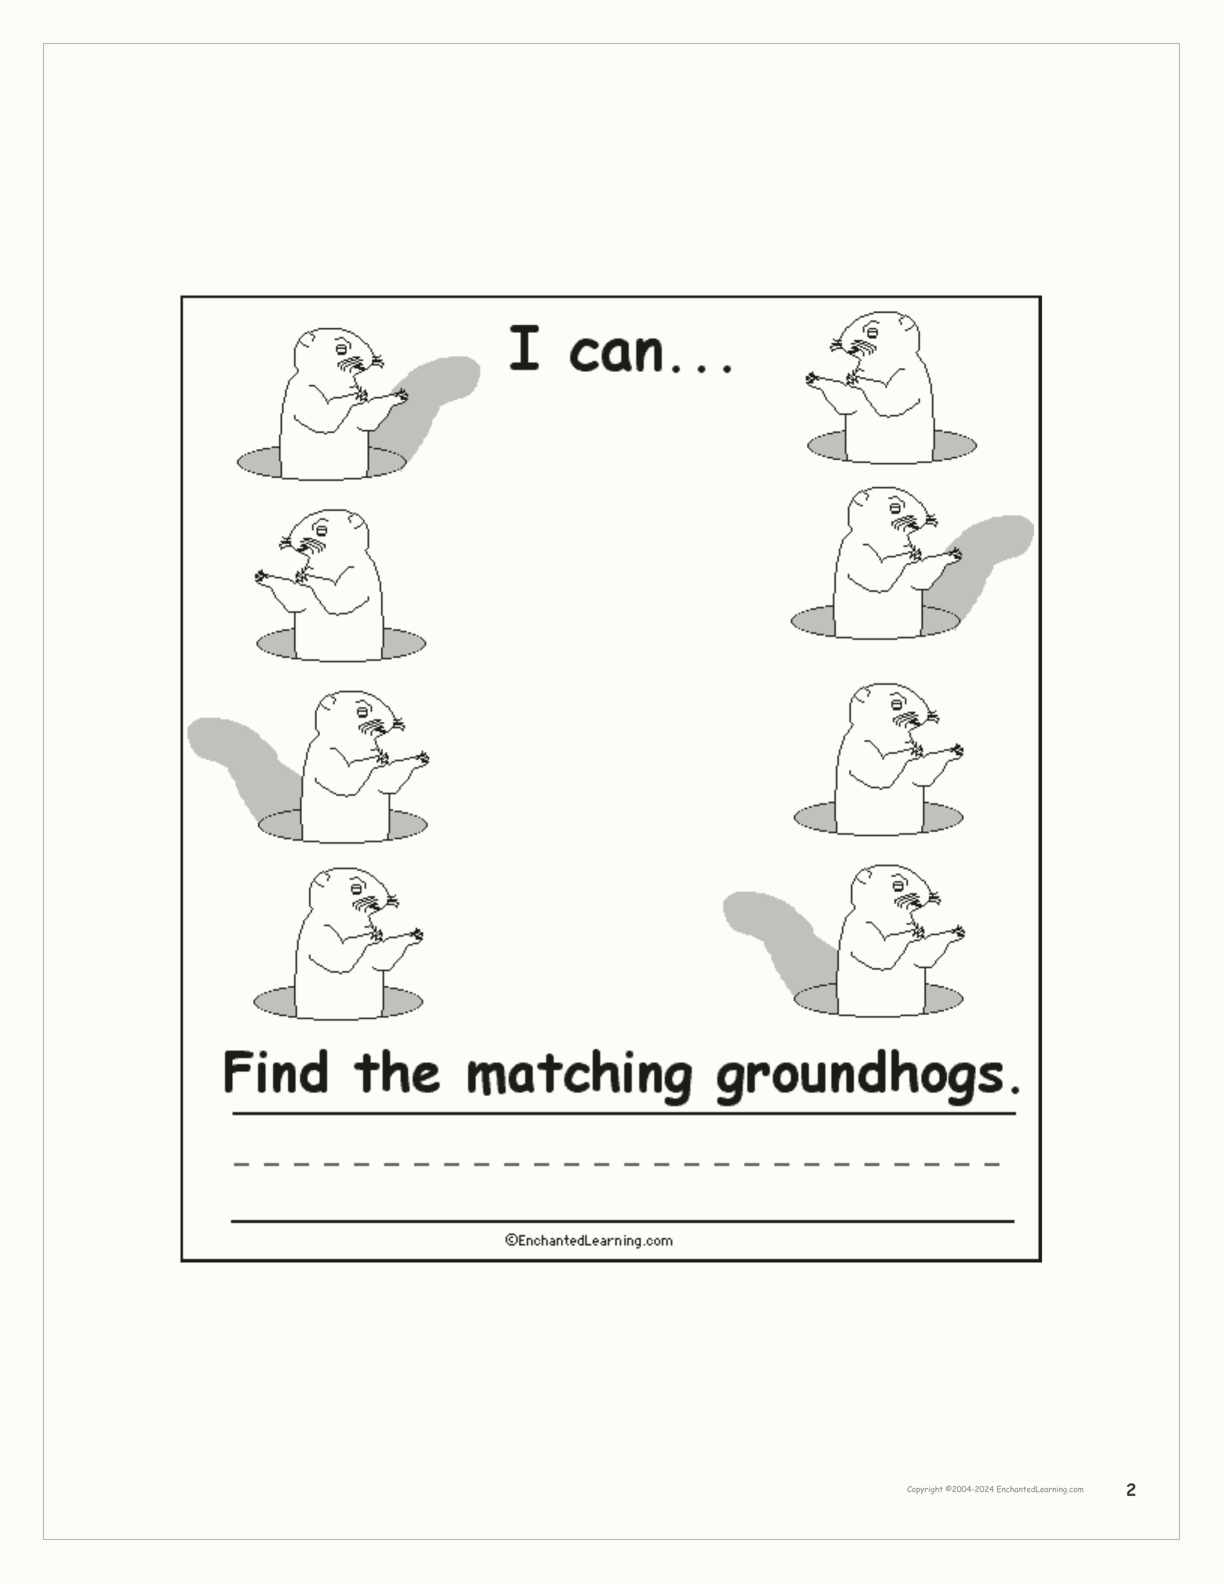 Groundhog Day 'I Can' Book interactive worksheet page 2